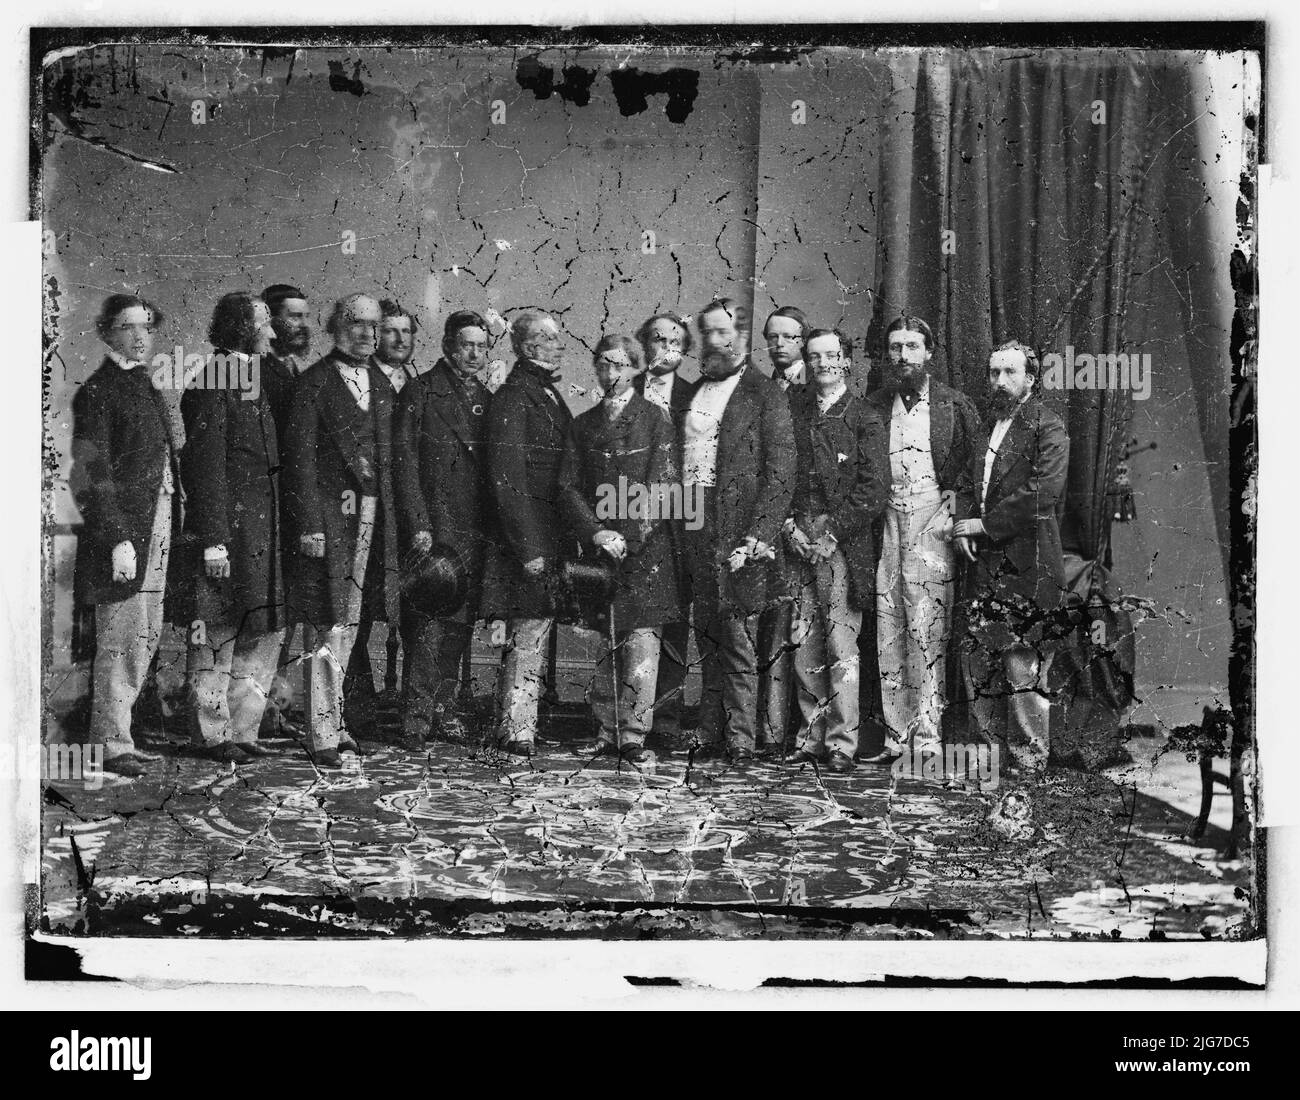 Prince of Wales group in 1861, 1860 October 13. [In 1860, Prince Albert Edward, the future King Edward VII (1841-1910, seen here centre), toured North America, the first such visit by a Prince of Wales]. Stock Photo